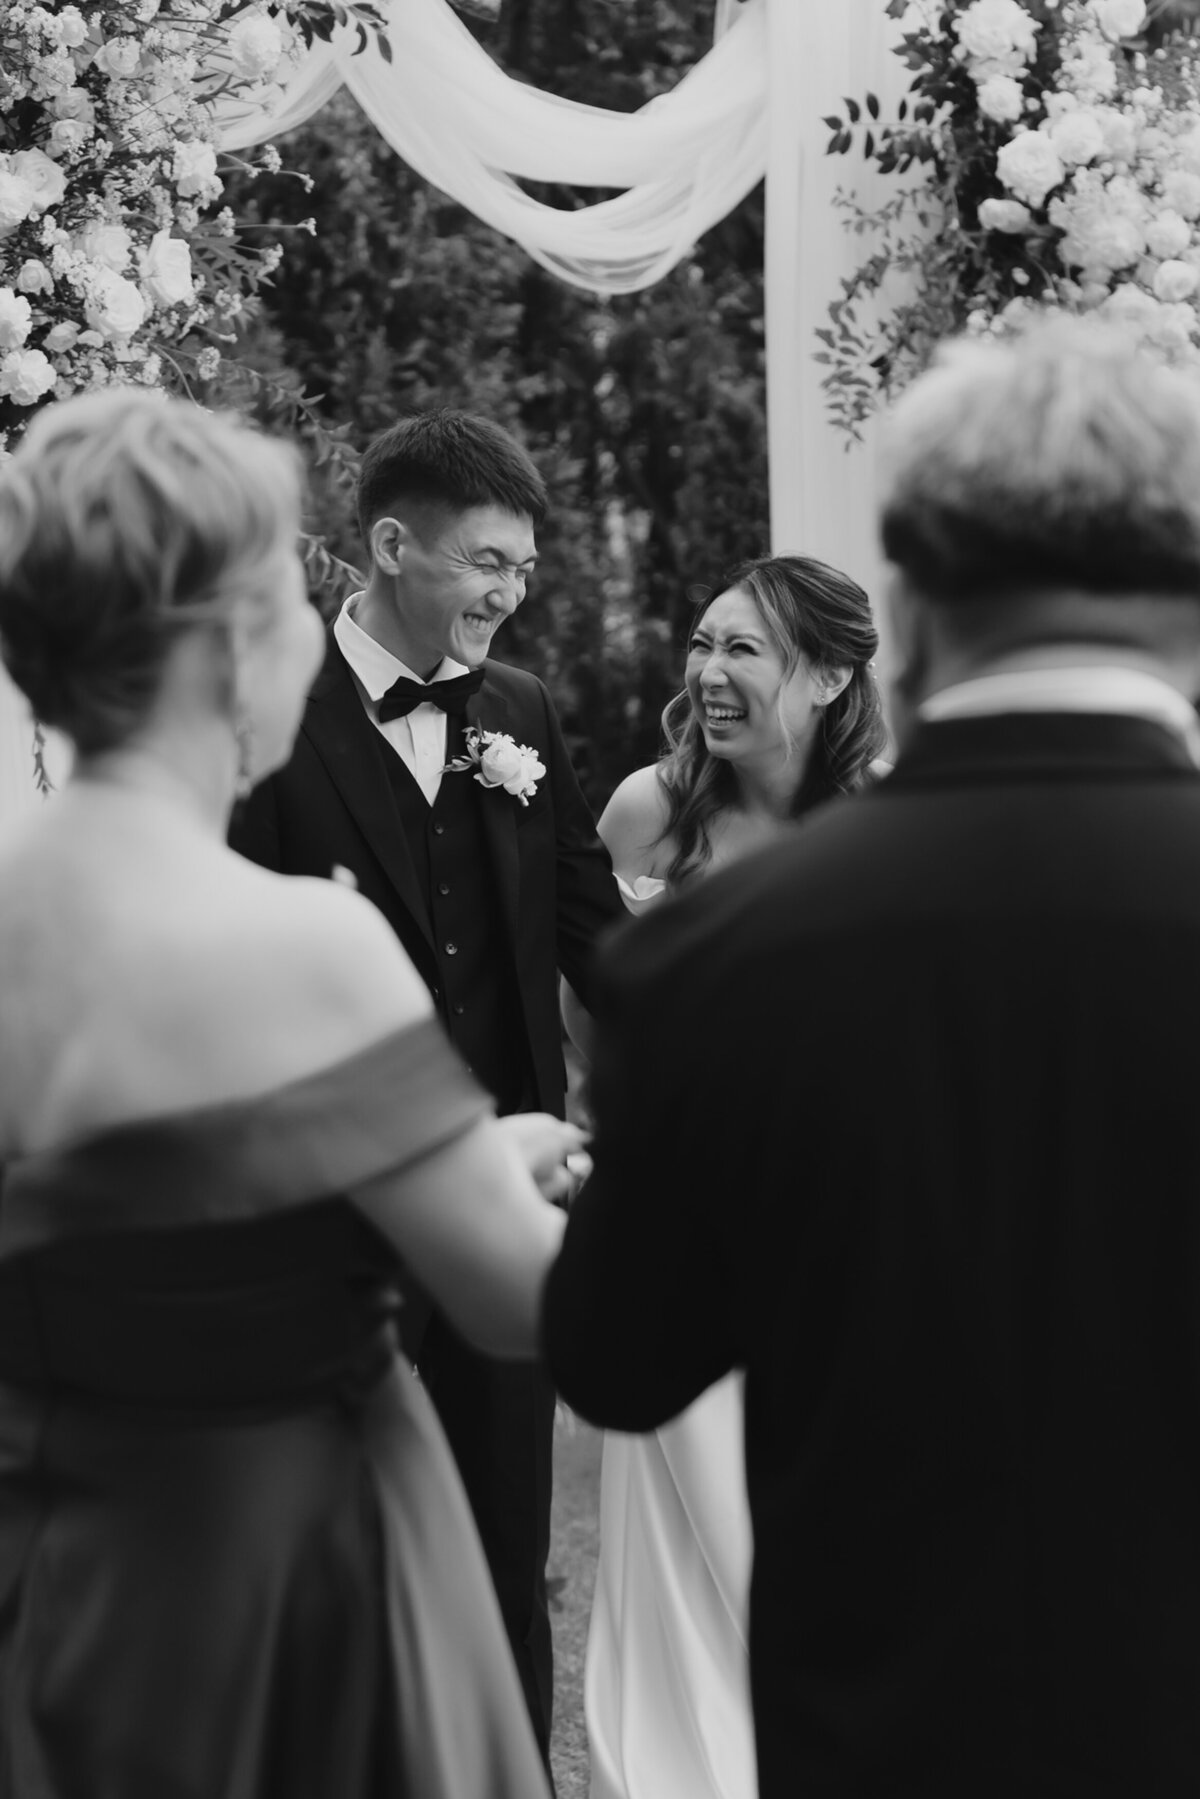 the couple laughing after the wedding ceremony